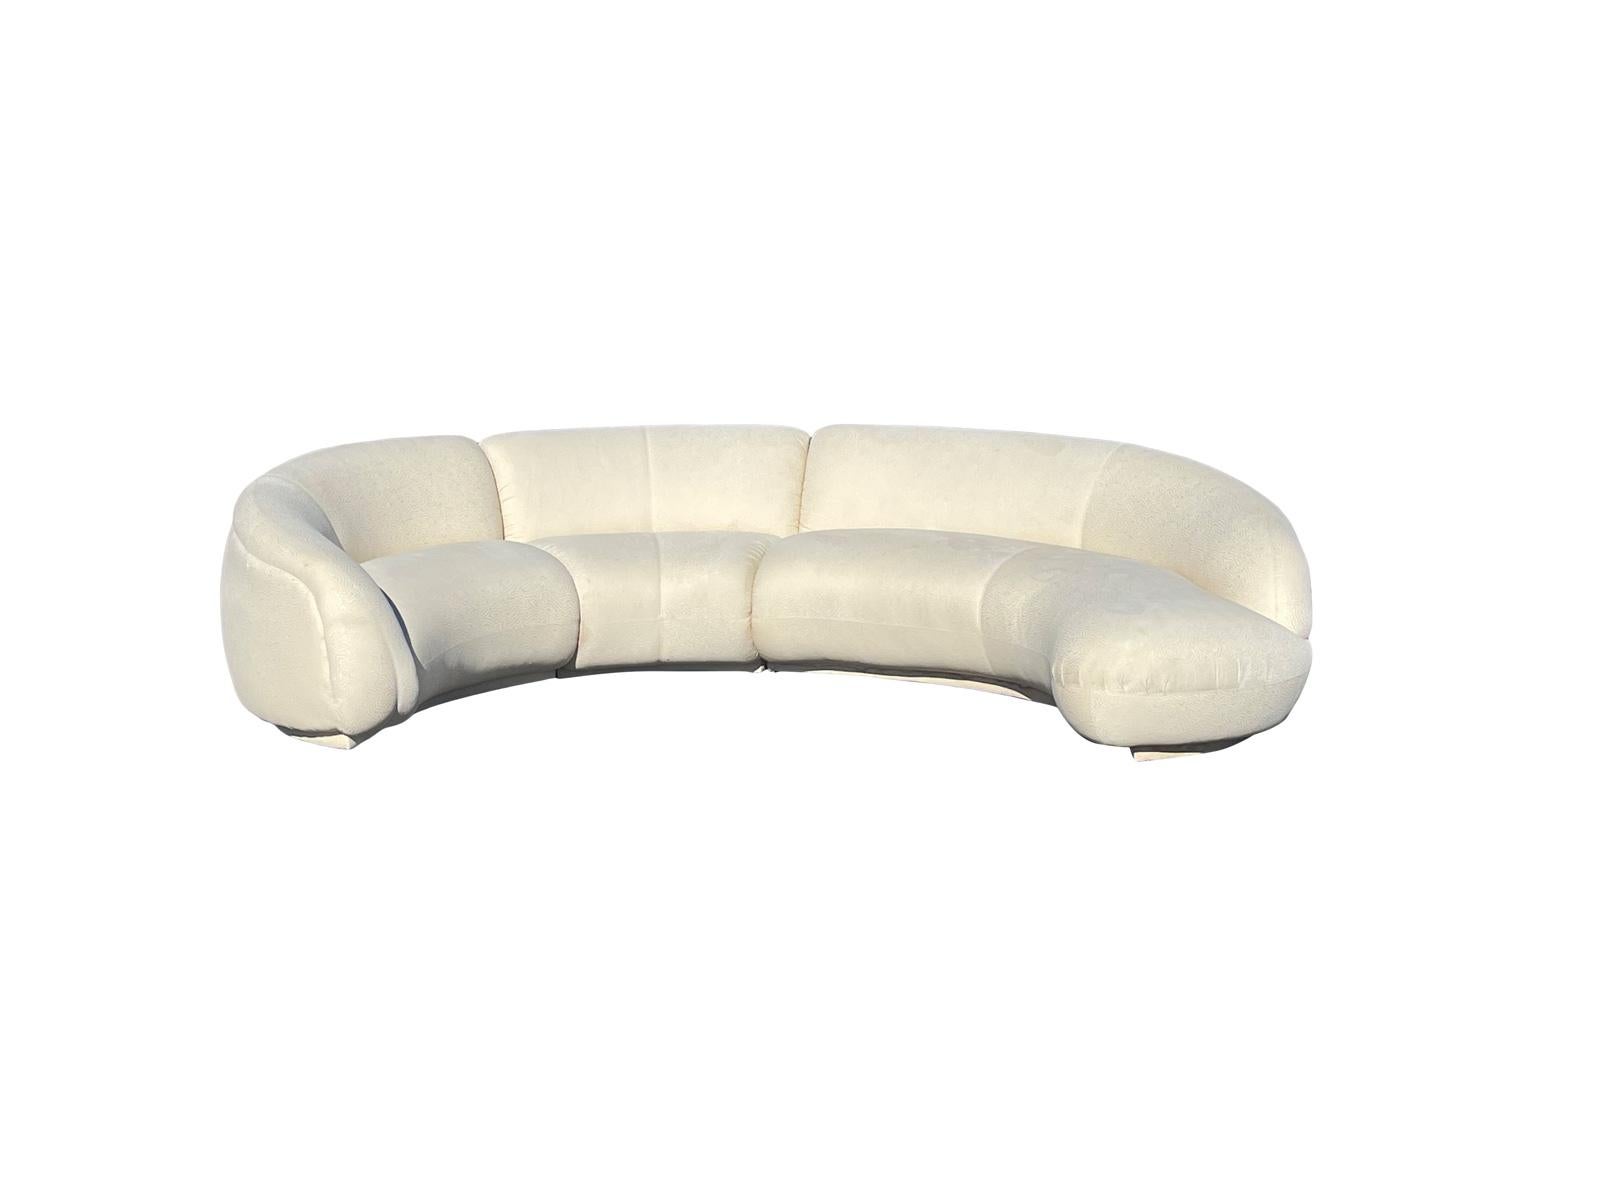 Post-Modern 1980s 3-Piece Biomorphic Curved Sofa By Preview  For Sale